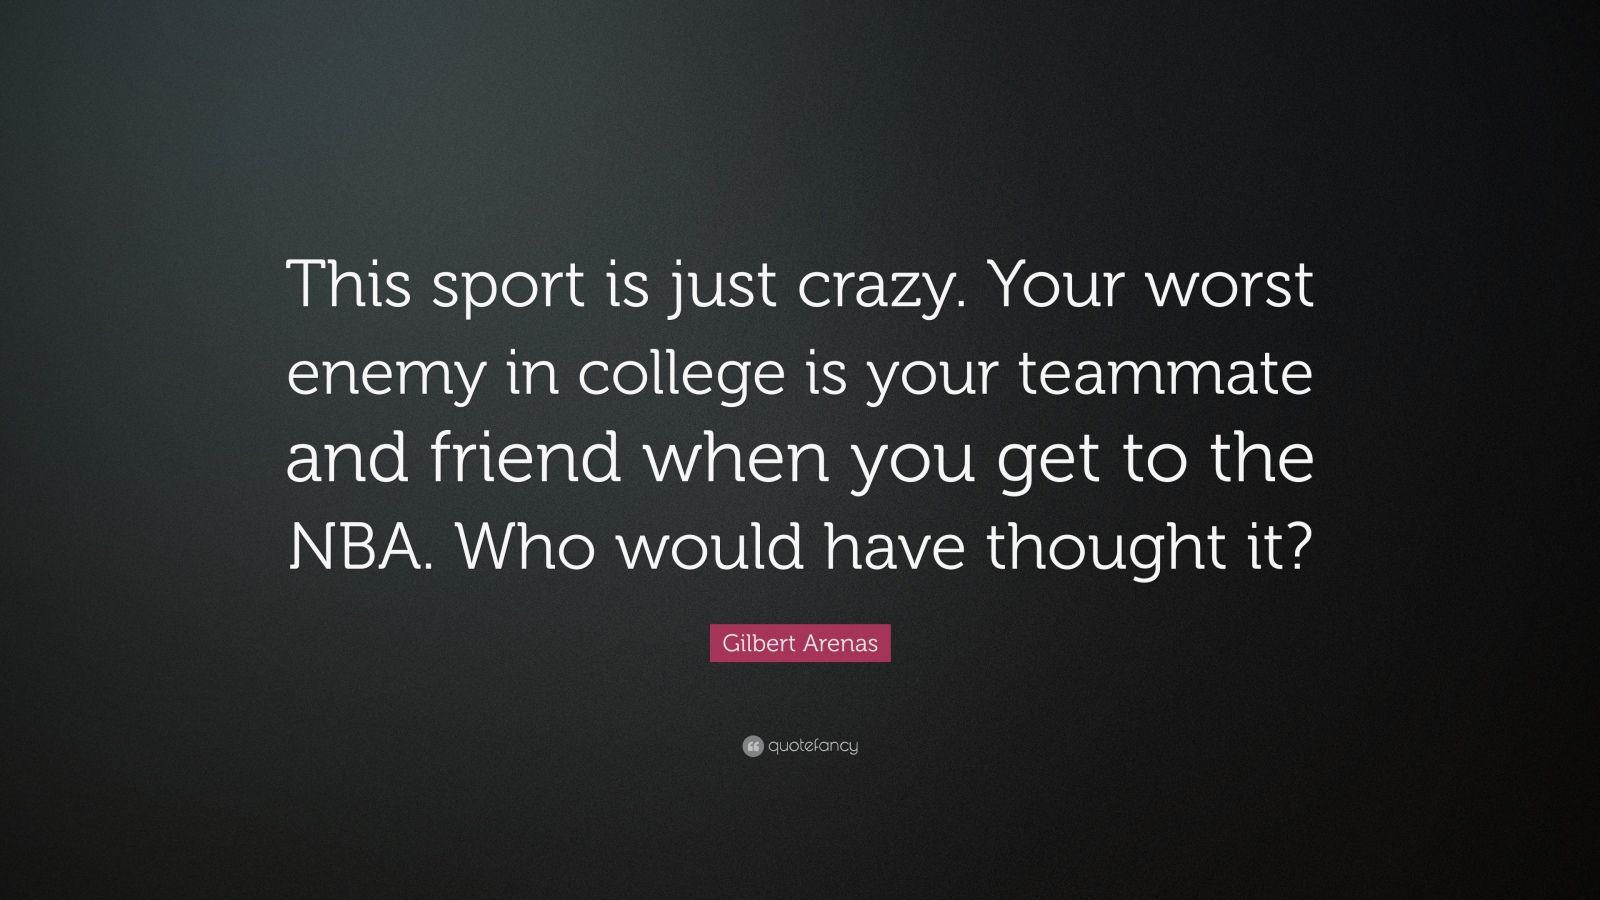 Gilbert Arenas Quote: “This sport is just crazy. Your worst enemy in